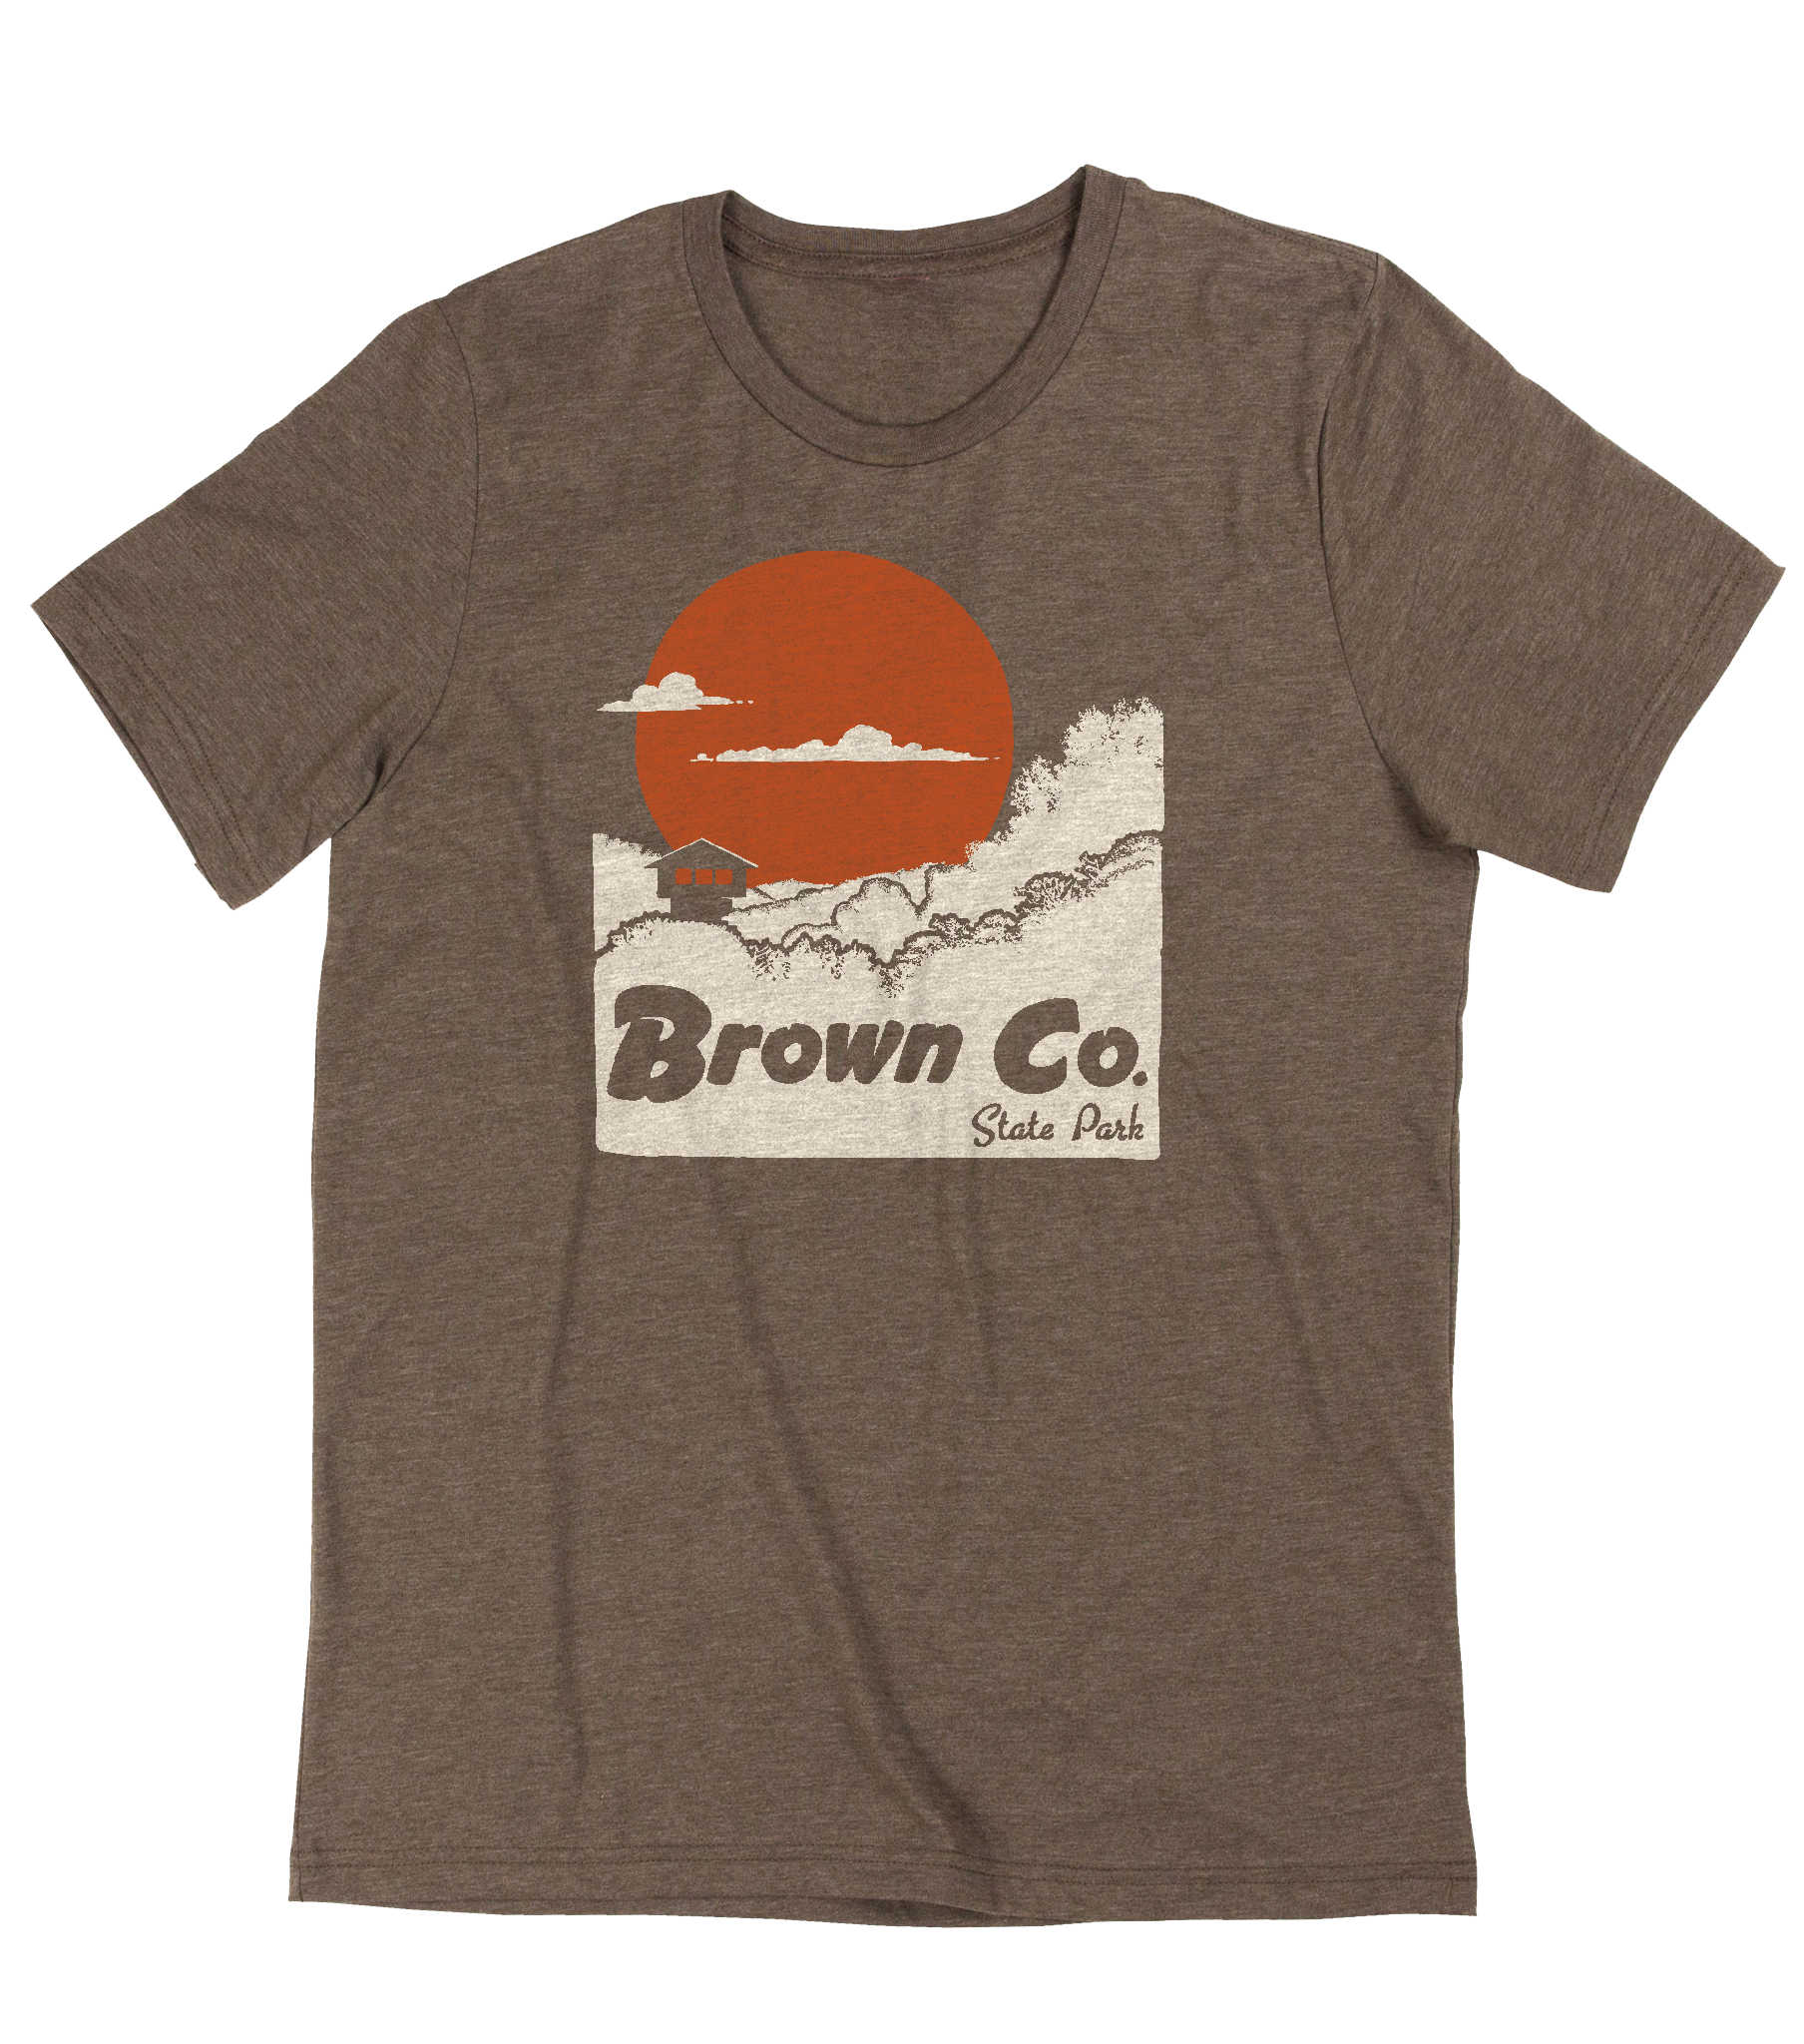 Picture of Brown County Vintage tee shirt.